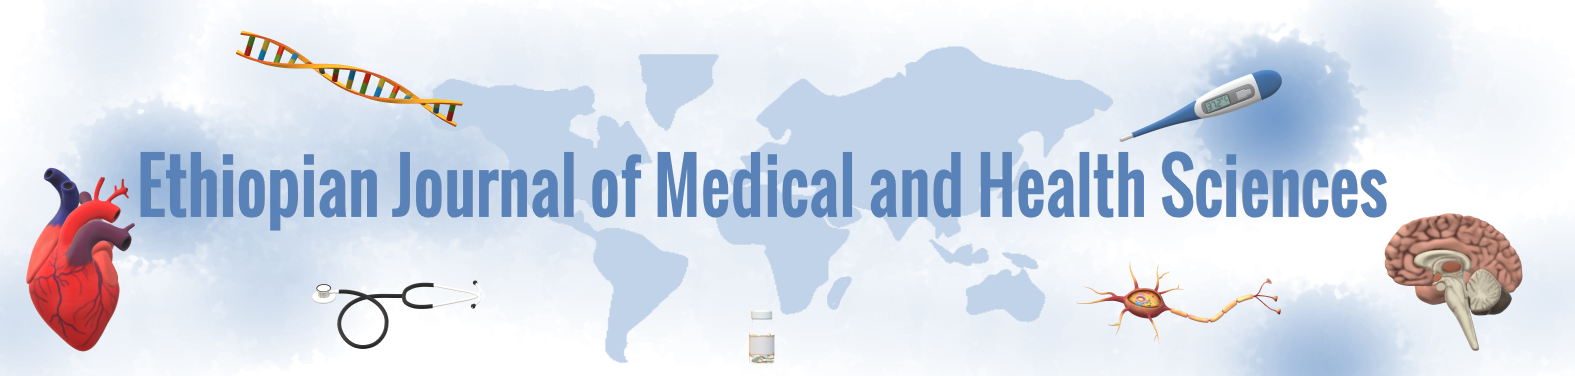 Ethiopian Journal of Medical and Health Sciences